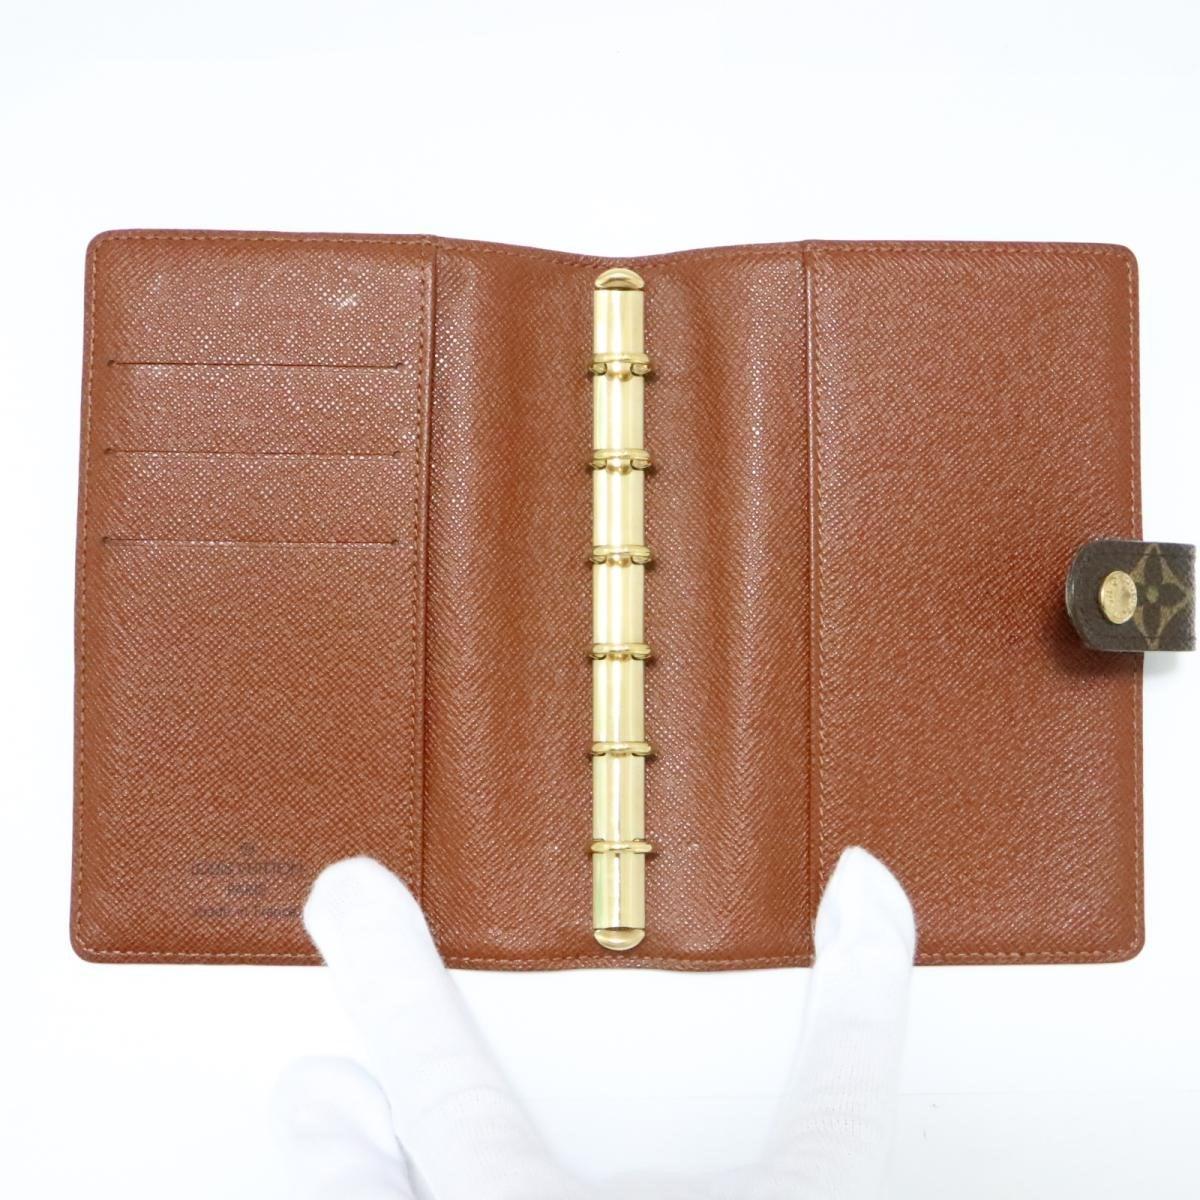 Louis Vuitton Authentic Agenda Pm Cover R20005 Monogram Brown Used Vintage in Brown for Men - Lyst